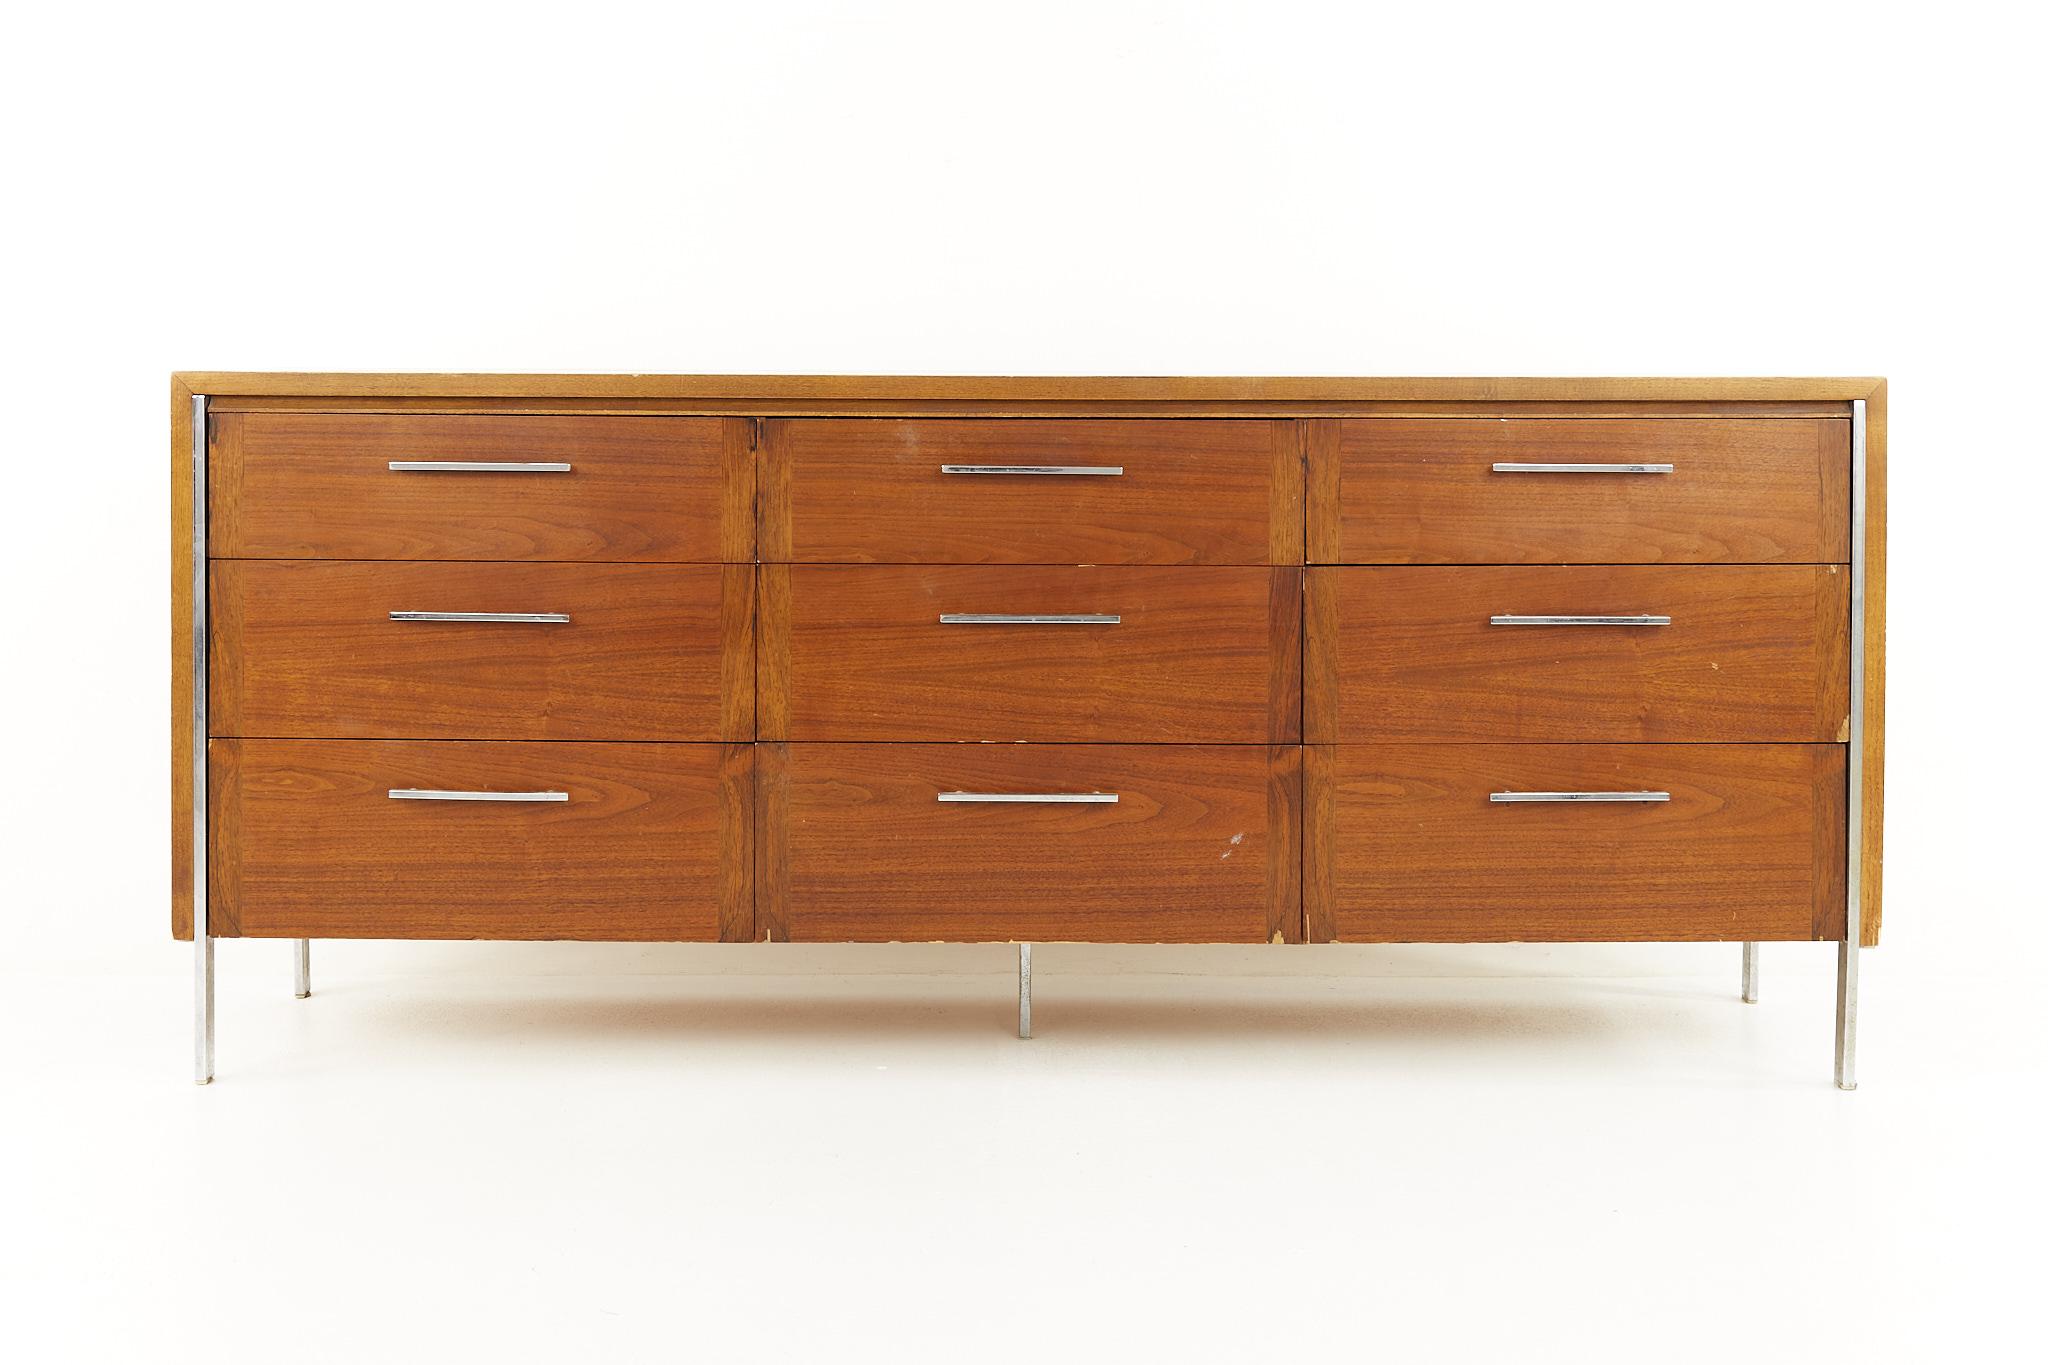 Paul McCobb Style Lane Mid Century walnut and chrome 9 drawer lowboy dresser

The dresser measures: 72 wide x 18 deep x 30 inches high

All pieces of furniture can be had in what we call restored vintage condition. That means the piece is